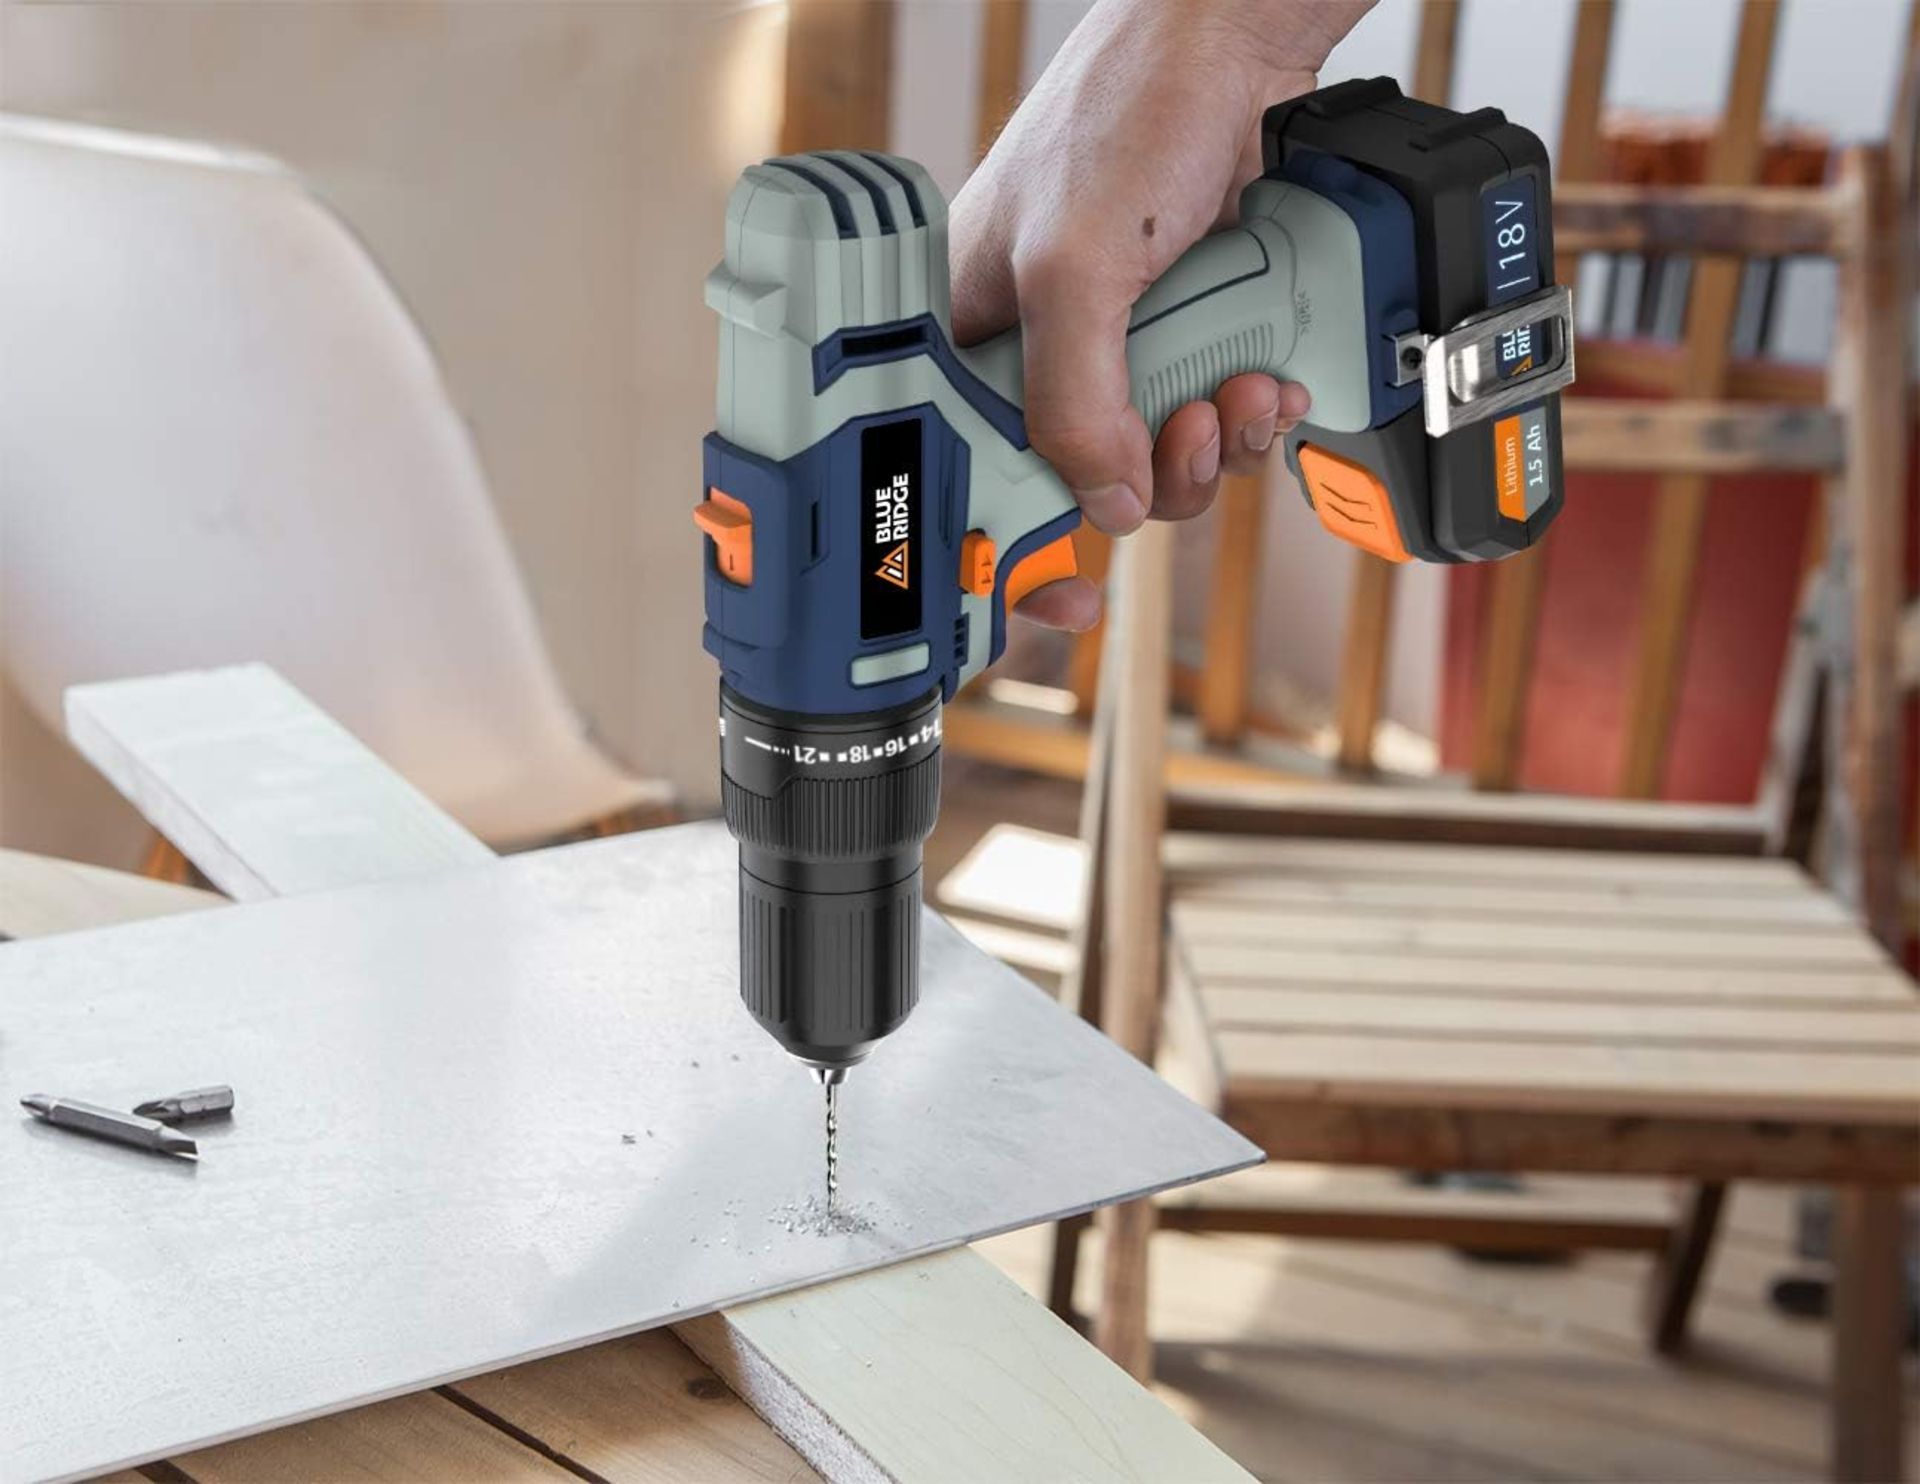 2x NEW & BOXED BLUE RIDGE 18V Cordless Hammer Drill with 2 x 1.5 Ah Li-ion Batteries & 43 Piece - Image 6 of 7